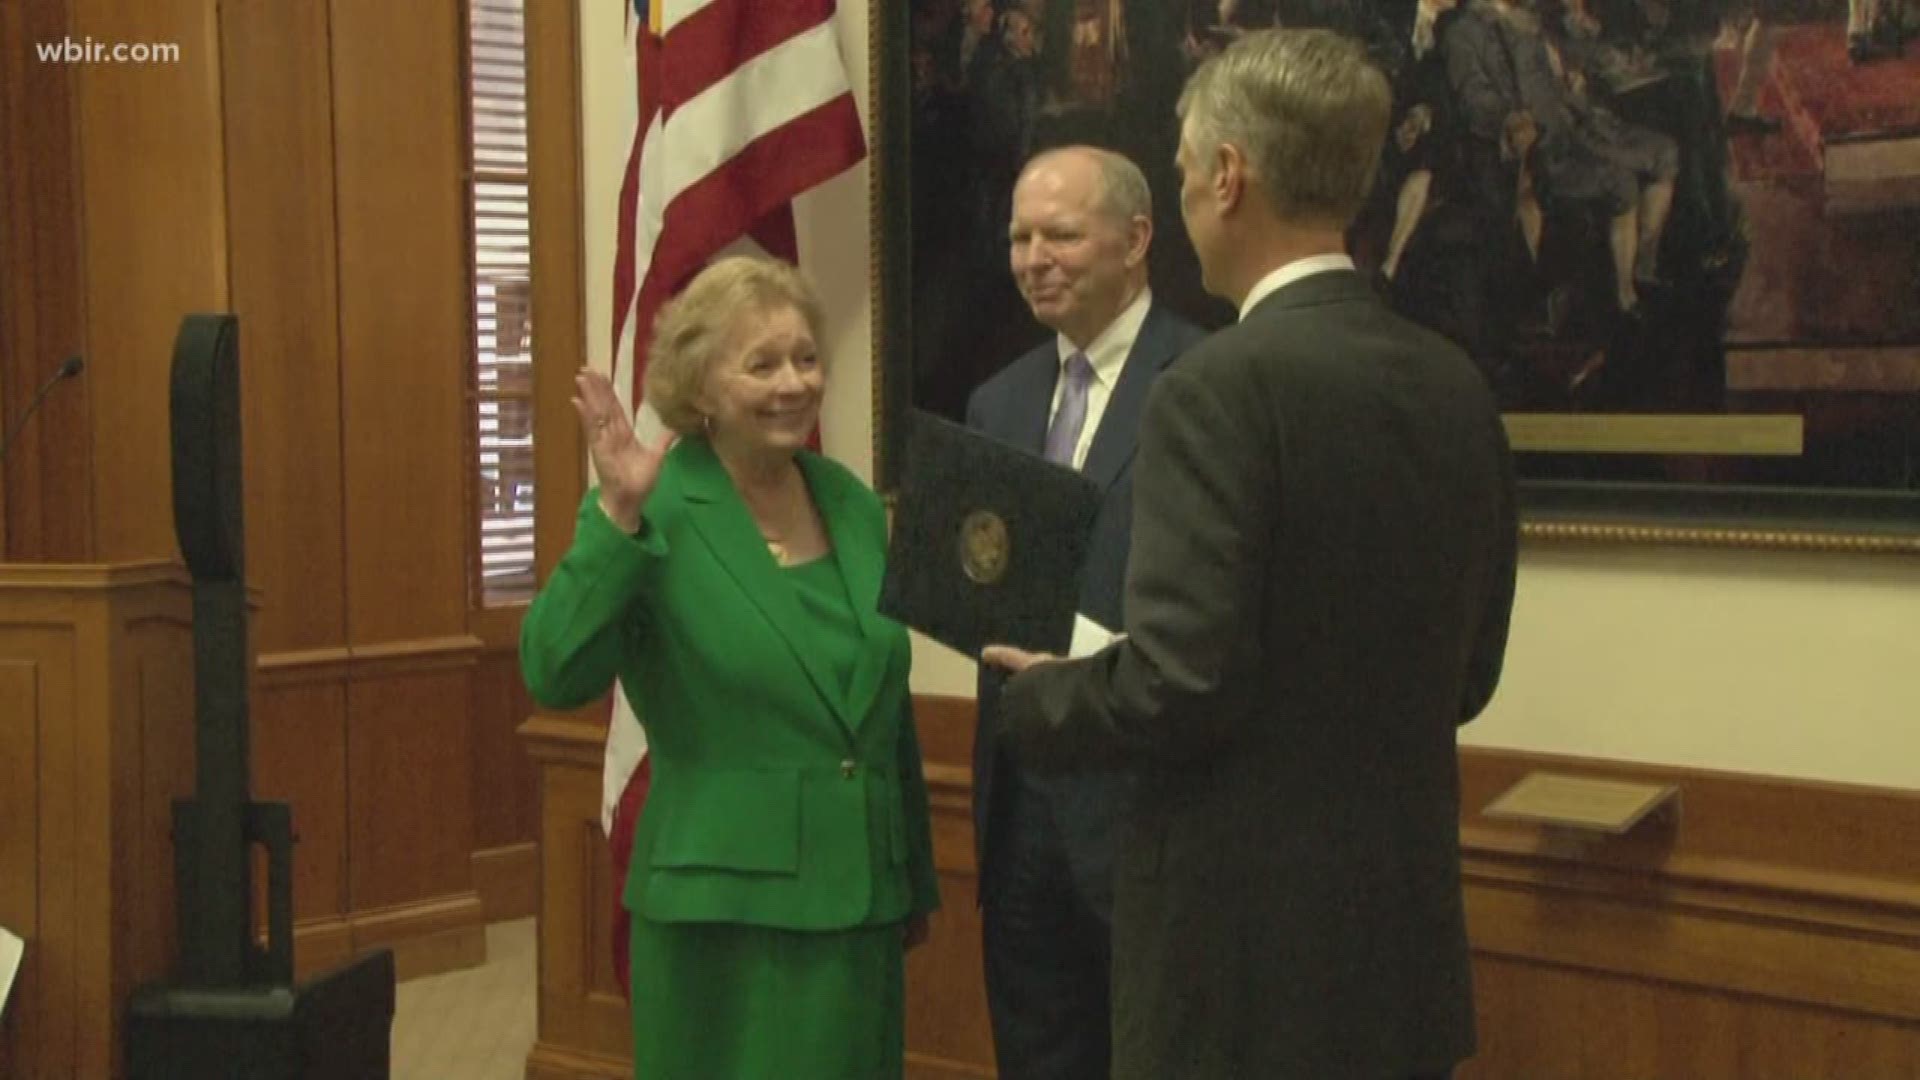 Pamela Reeves took her oath of office this morning. She was appointed to her district judge-ship by President Barack Obama back in 2012.